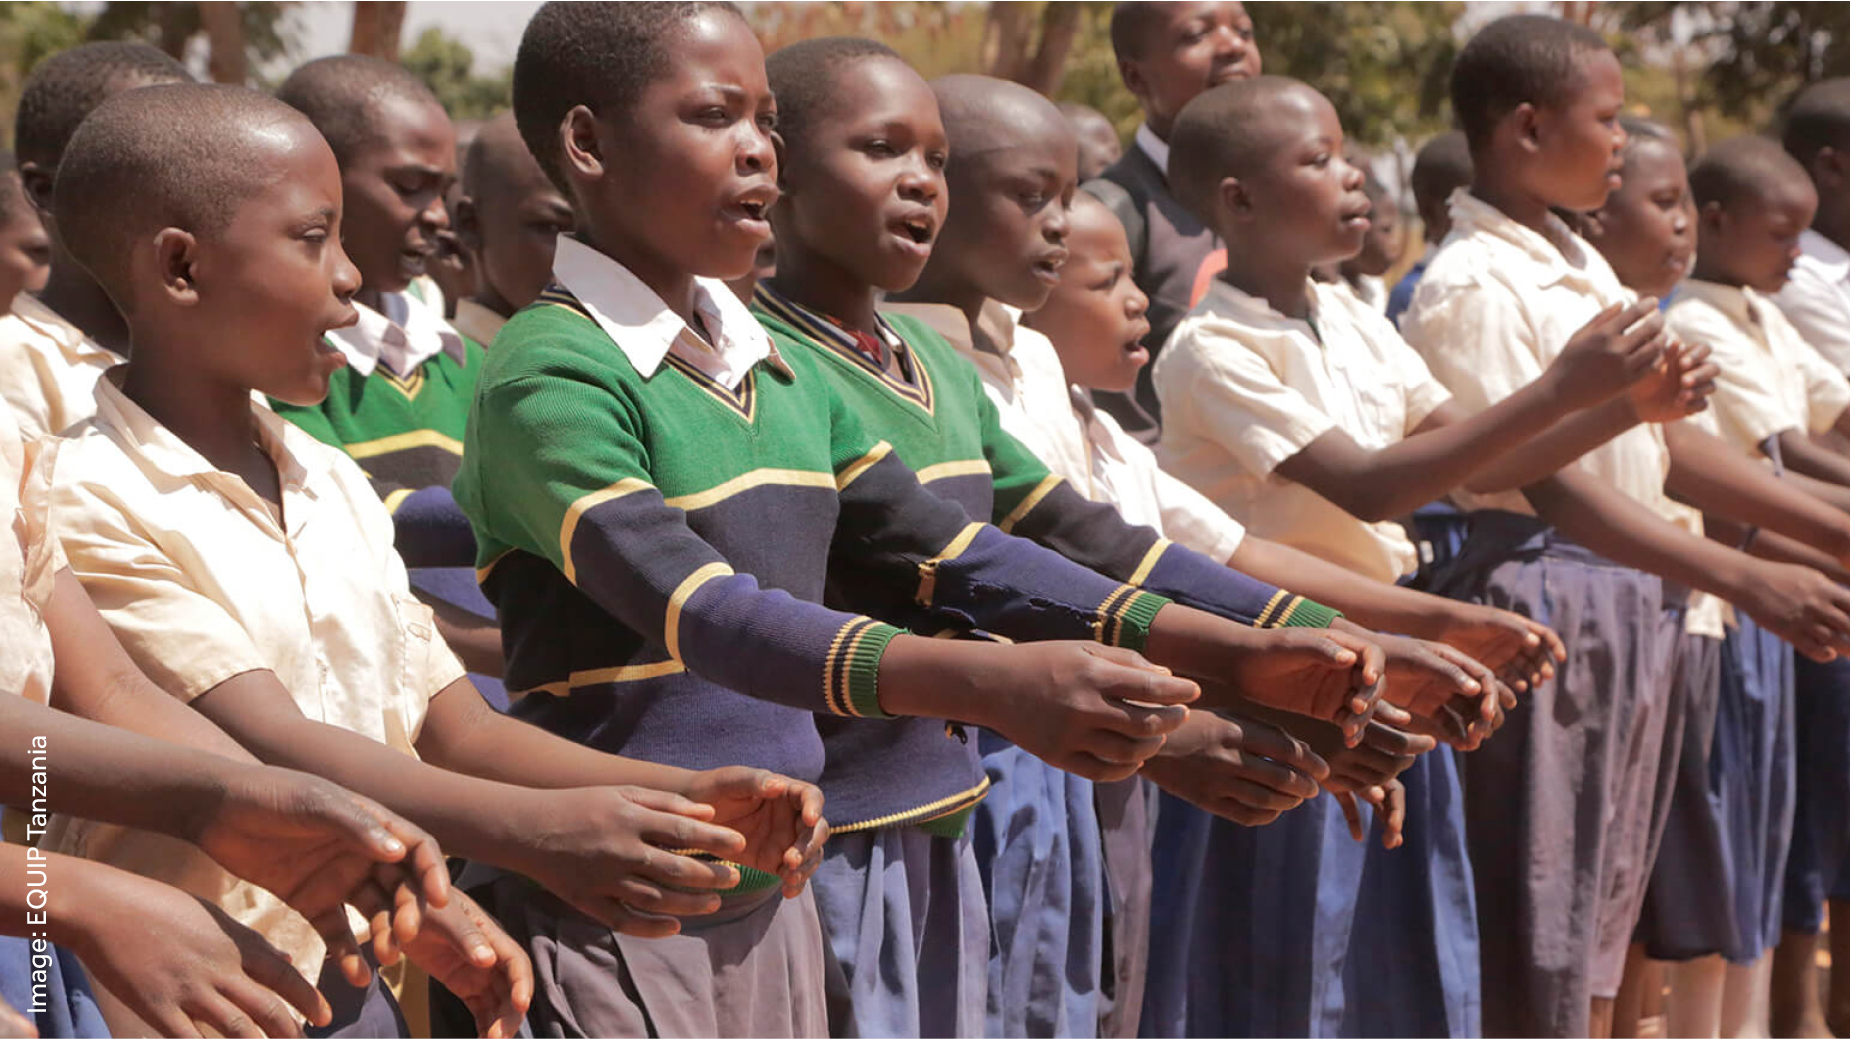 Tanzanian children in school uniform lined up and singing